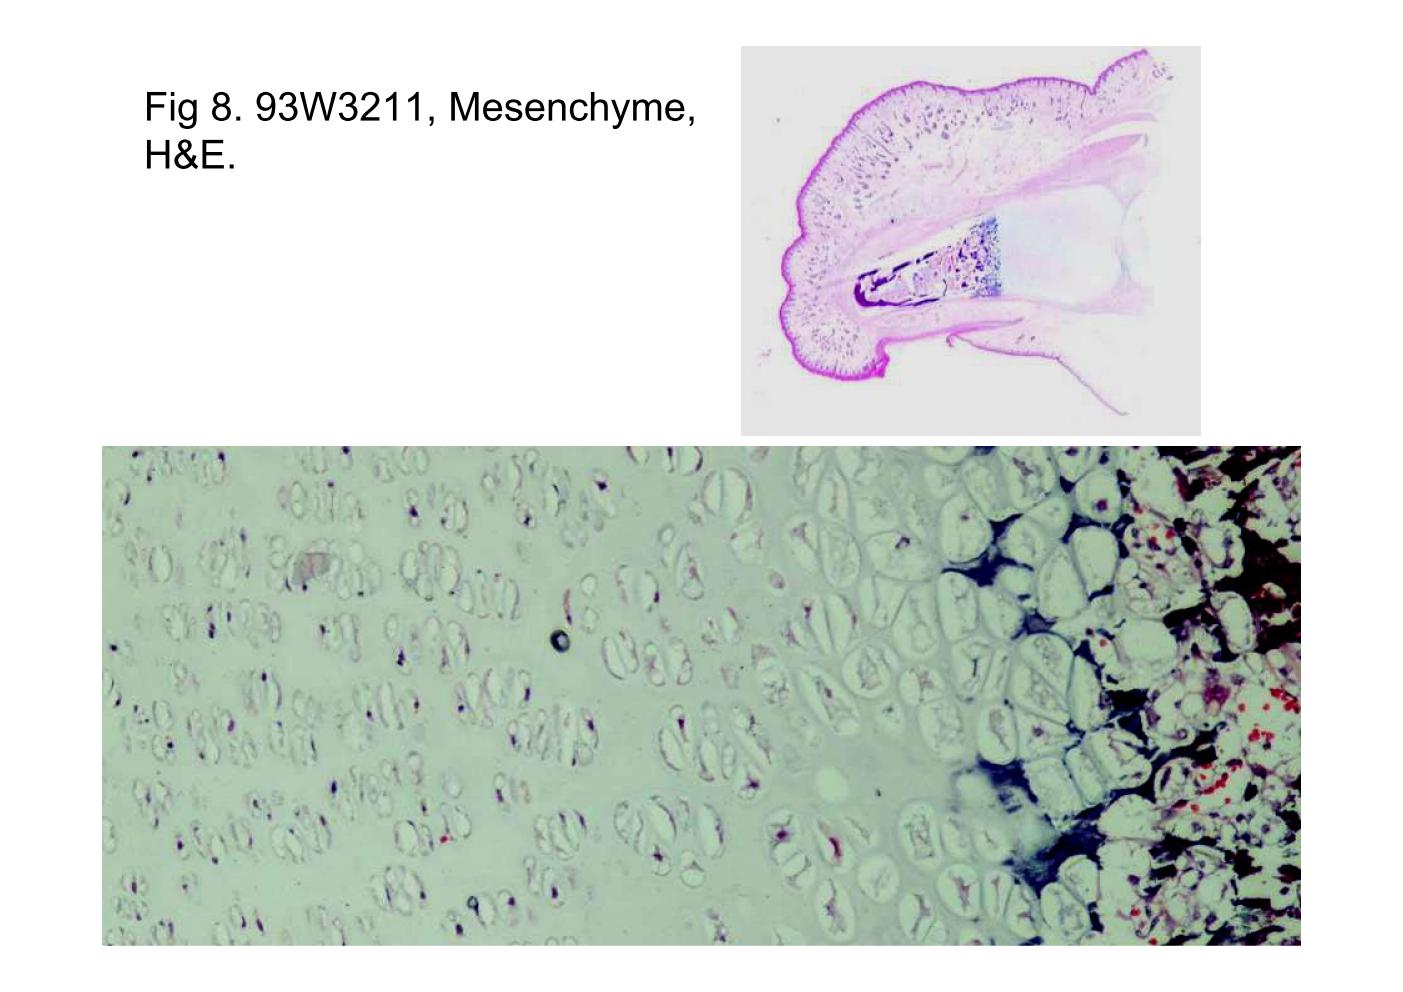 block6-1_19.jpg - Fig 8. 93W3211 Mesenchyme, H&E.This photomicrograph shows a longitudinal section ofembryonic distal phalanx. This developing bone is undergoingendochondral ossification (similar to 93W3279).